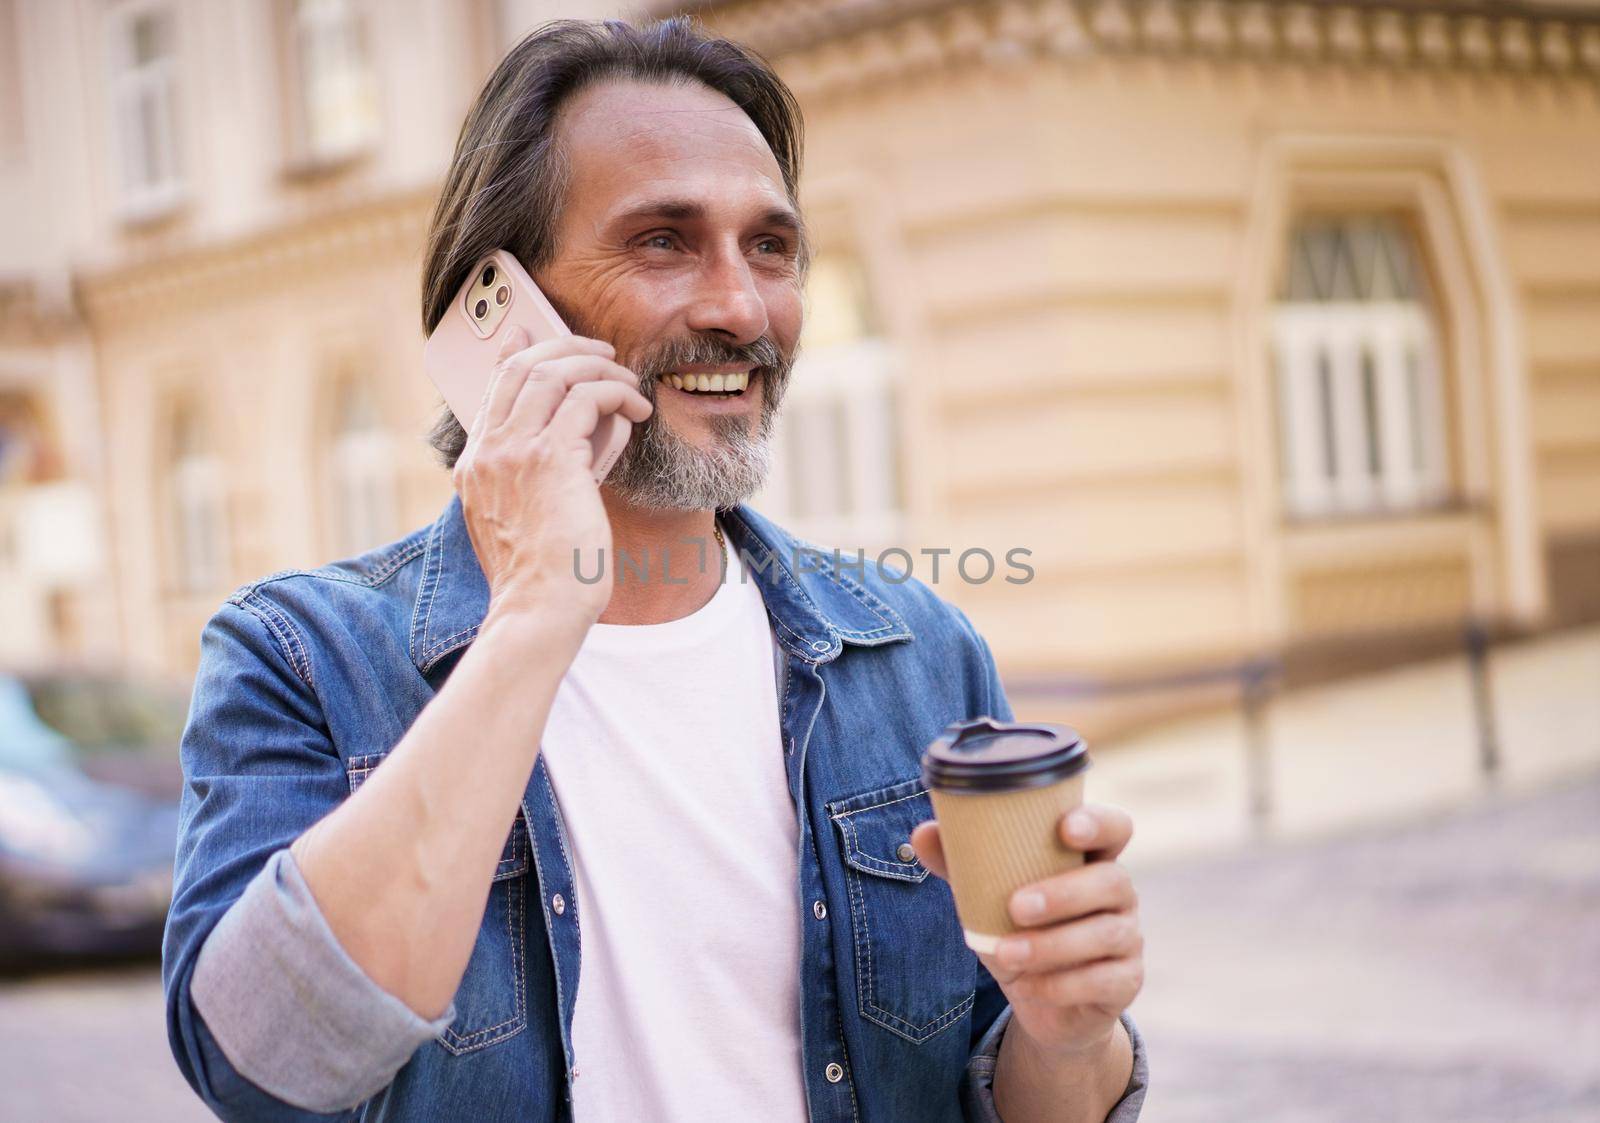 Happy middle aged man with grey bearded talking on the phone holding coffee in disposable paper cup standing outdoors in old city background wearing jeans shirt. Freelancer traveling man by LipikStockMedia